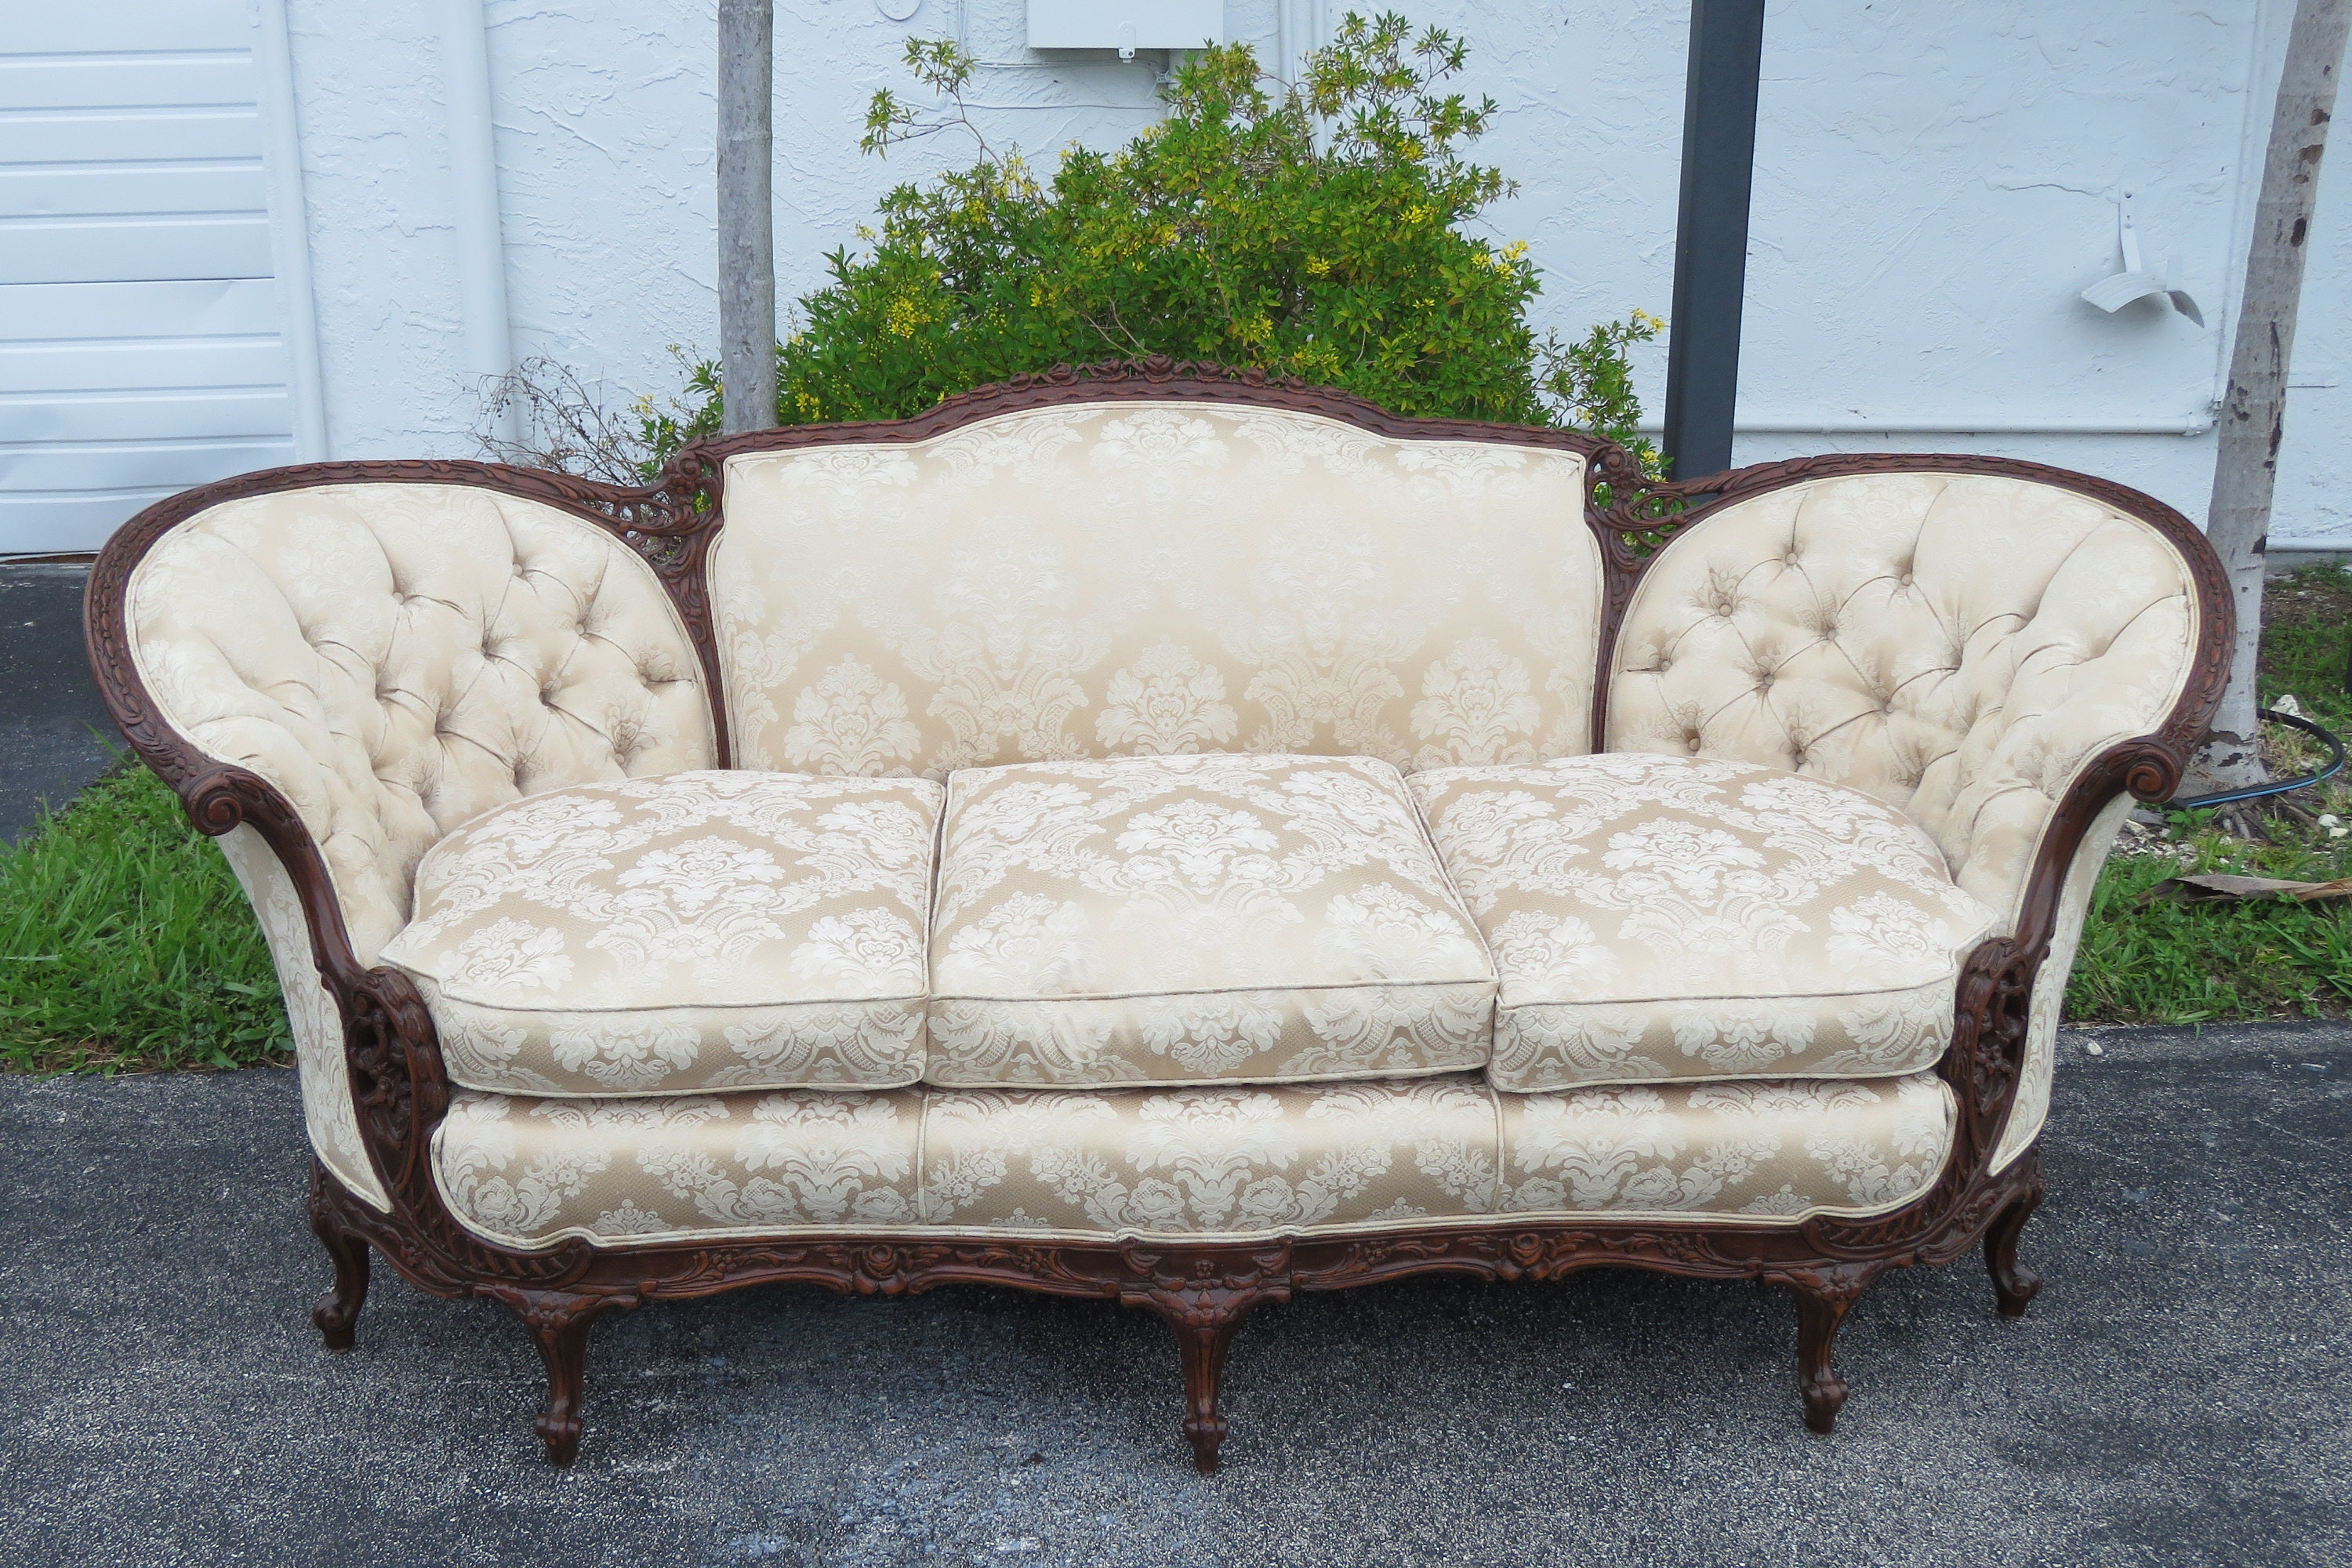 Victorian Antique Scandinavian Carved Settee or Sofa, Mohair